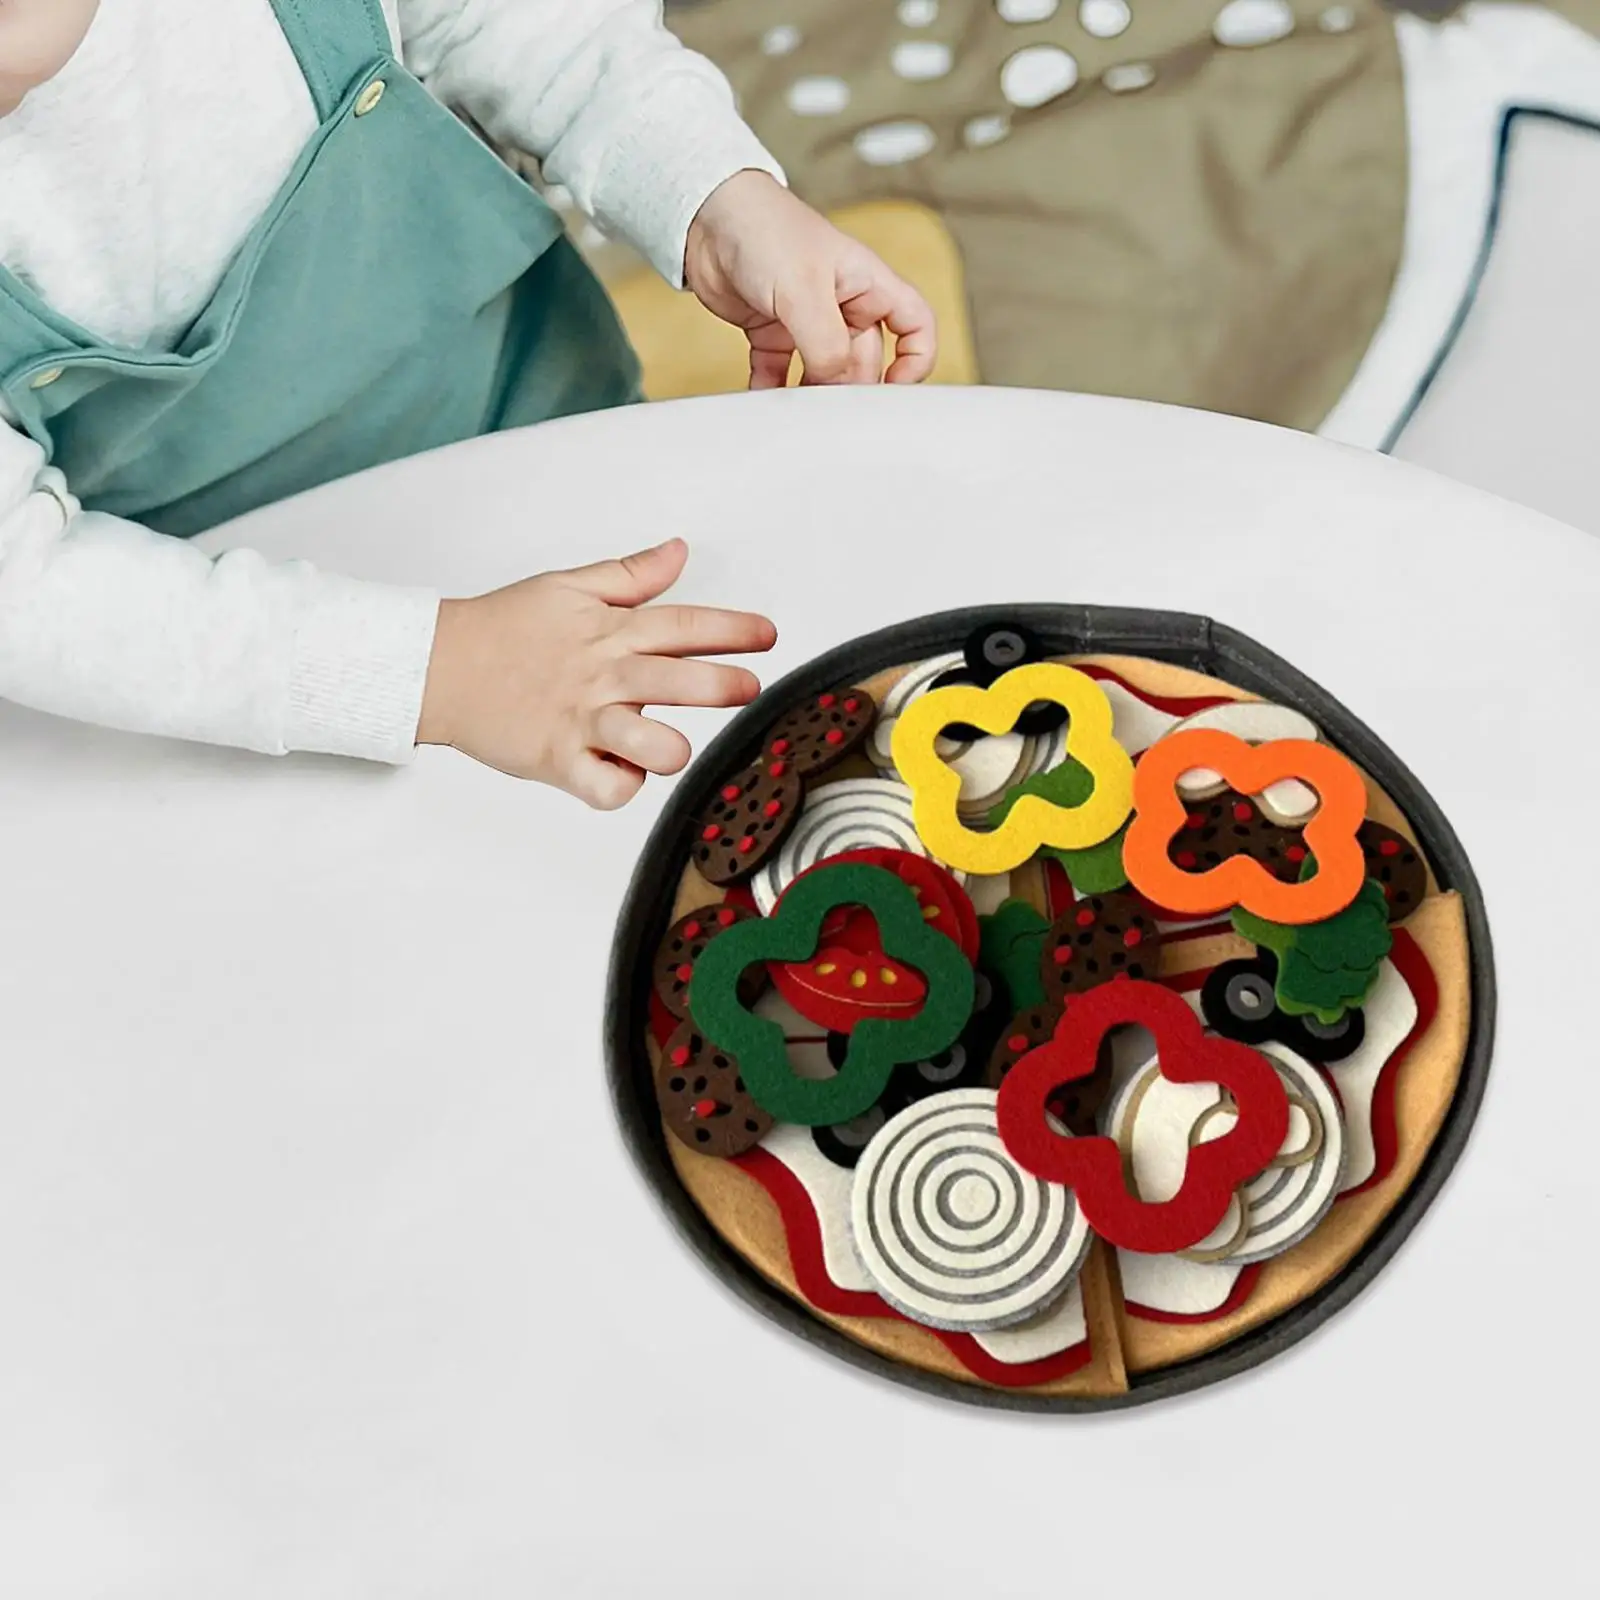 

Pizza Play Food Set Role Play Toy Kitchen Food Toy for Gift Children Ages 2+